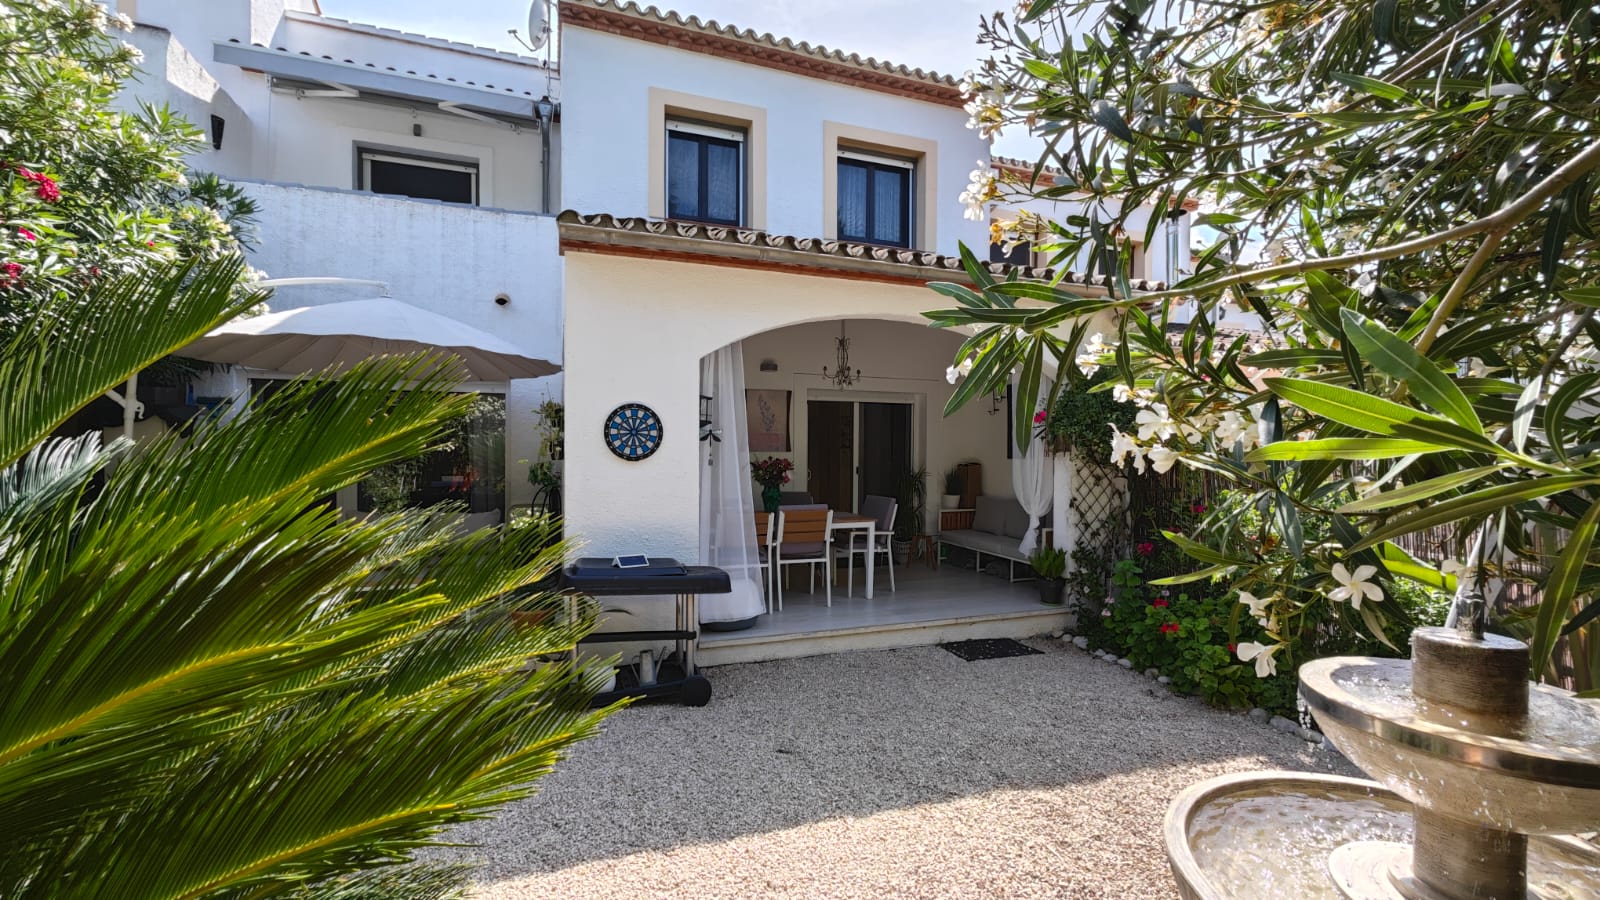 BEAUTIFUL TOWNHOUSE IN PEDREGUER